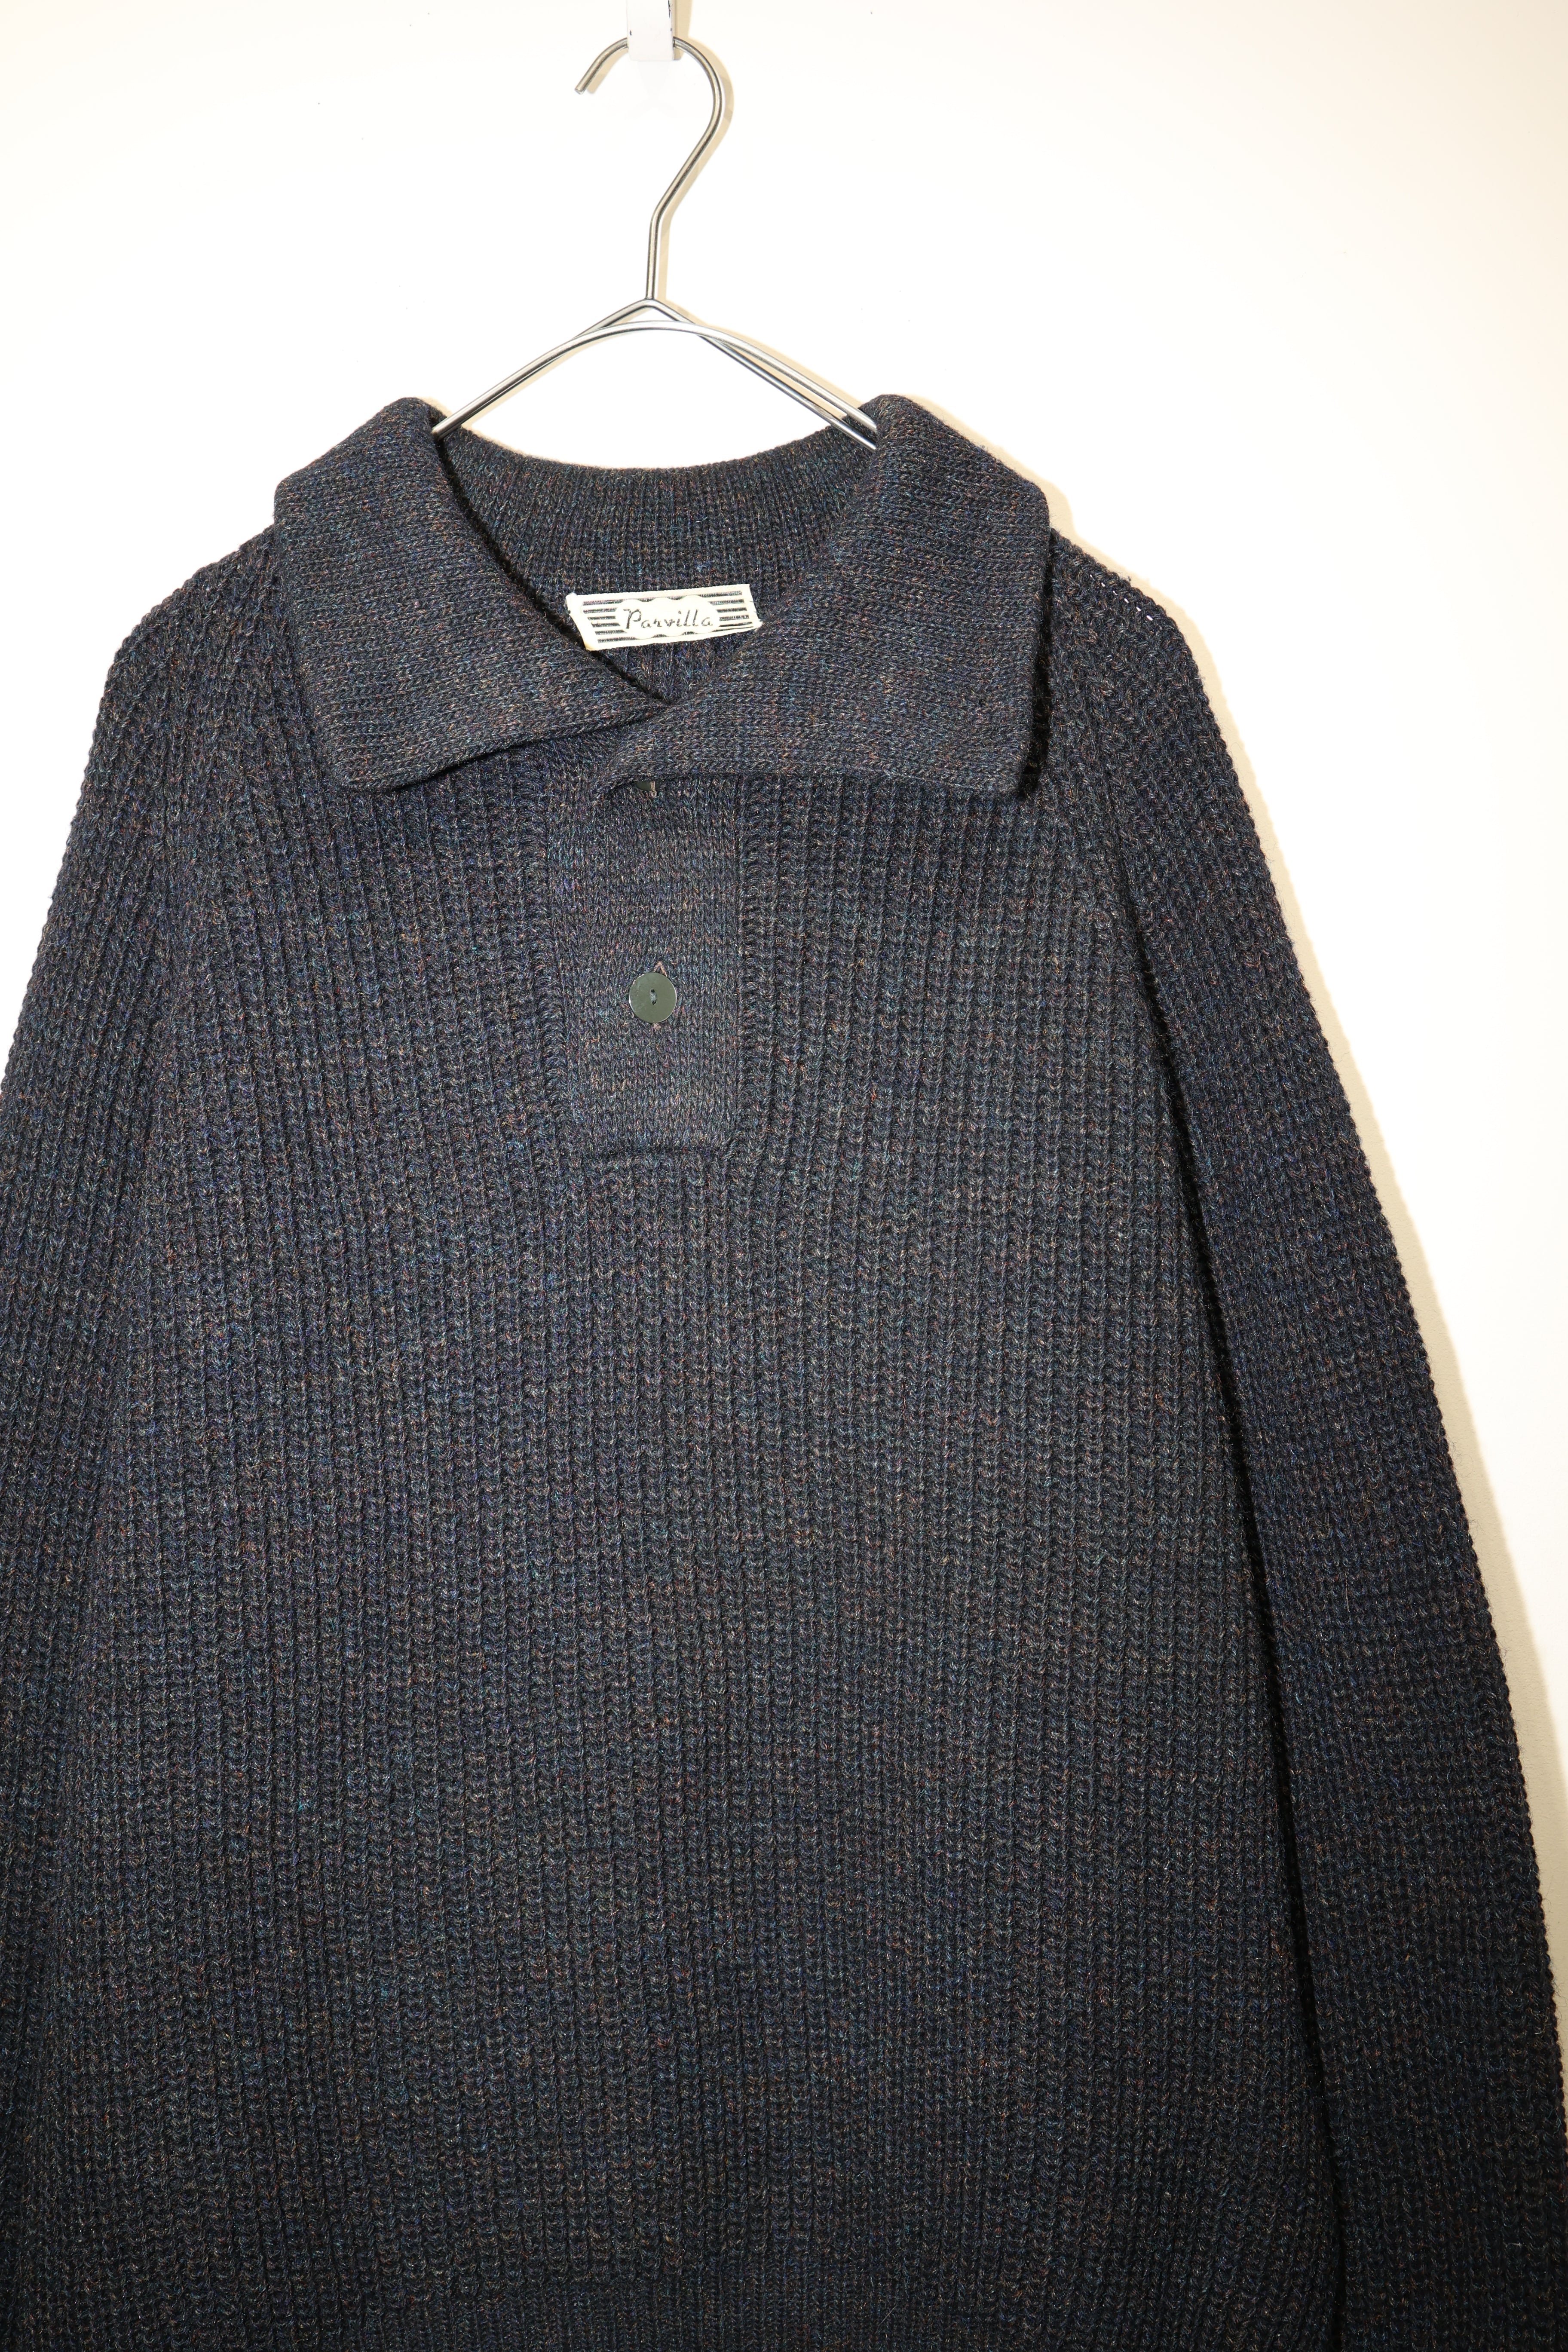 circa 50's wool mixed colored knit polo